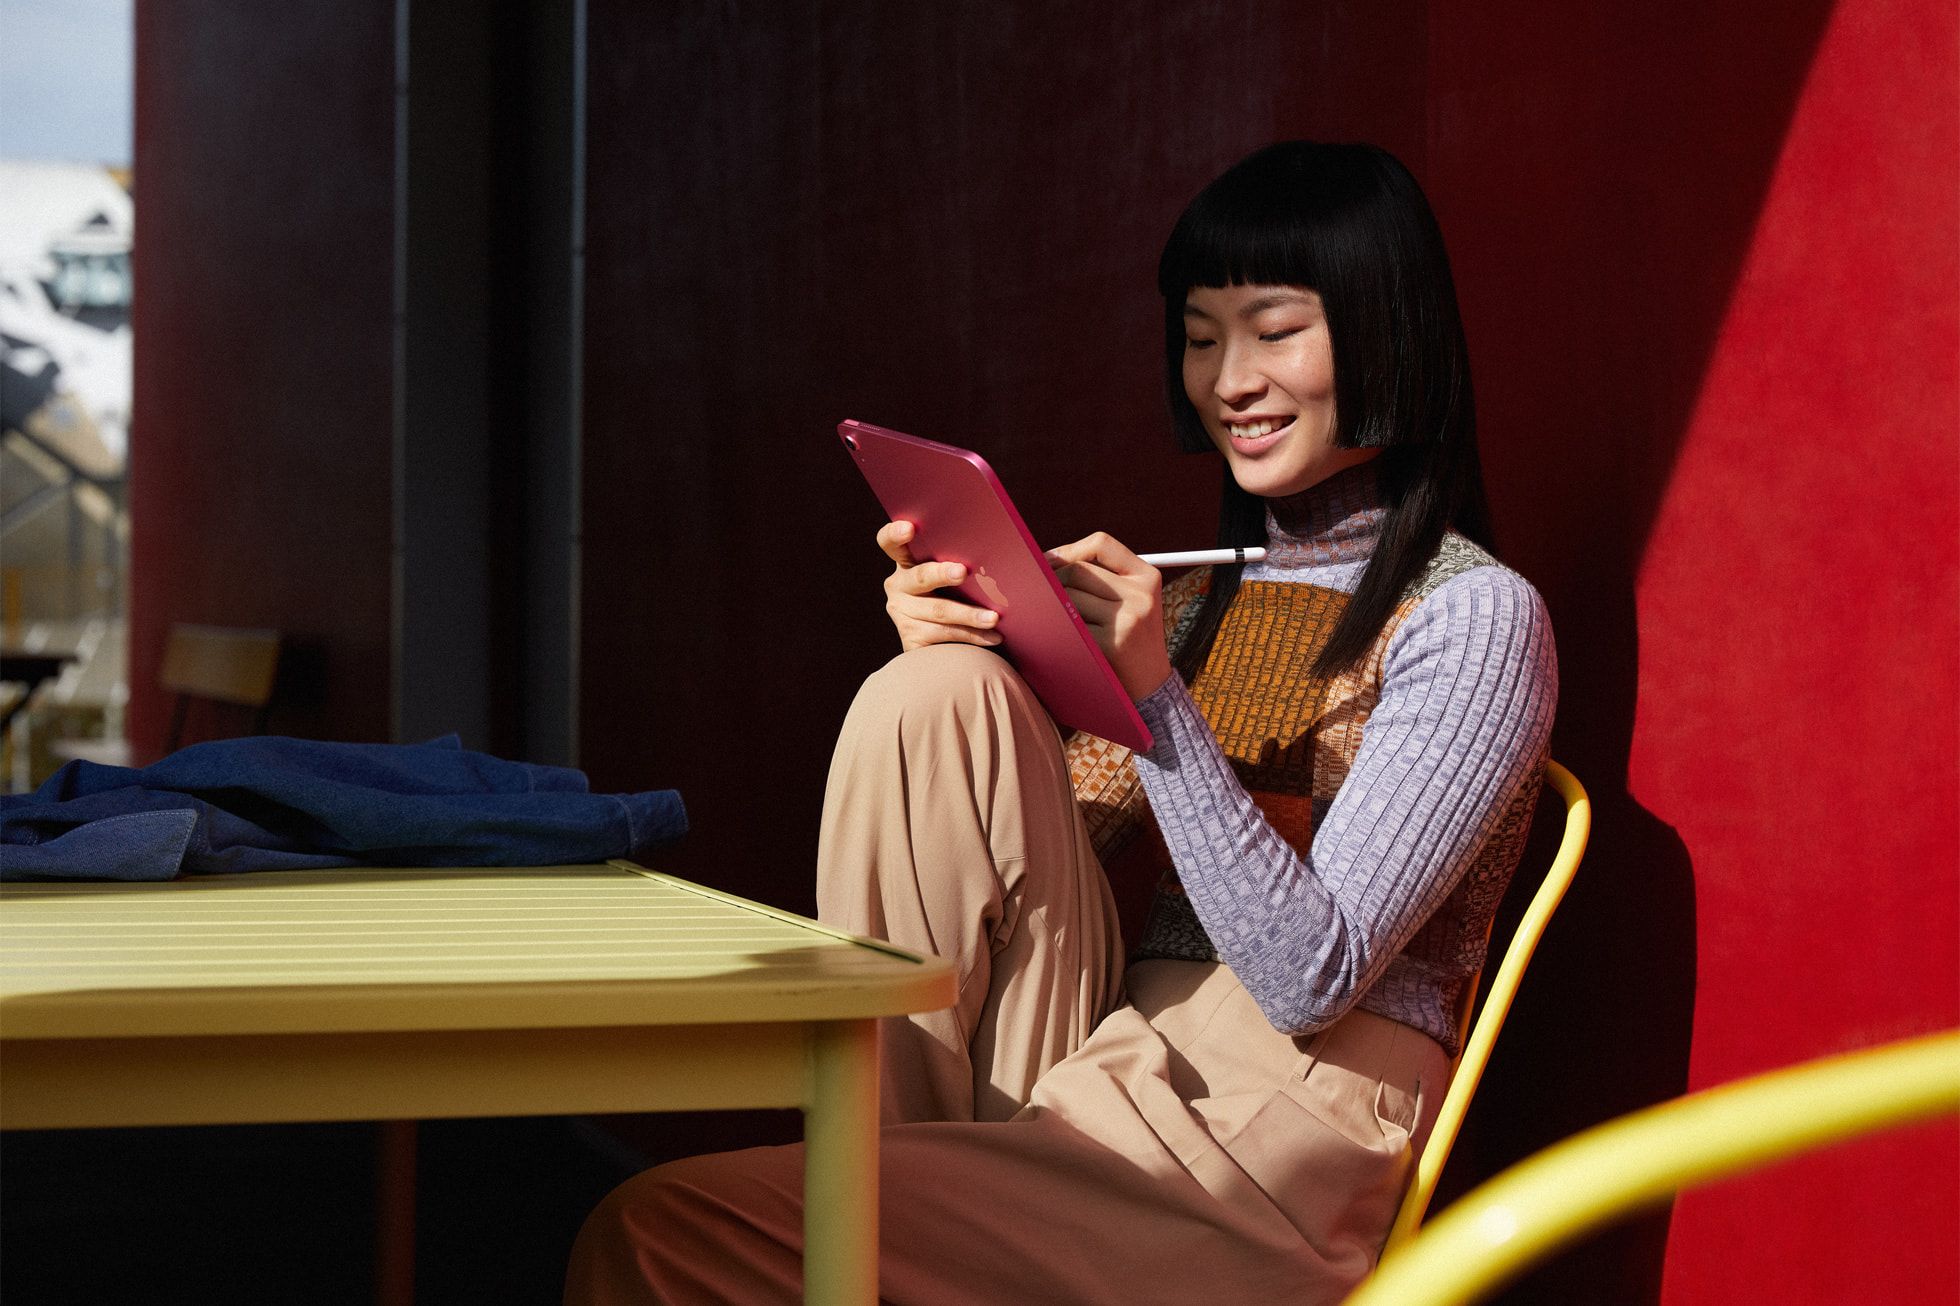 A person sits in a chair with colorful red background holding an iPad while drawing into it and smiling.